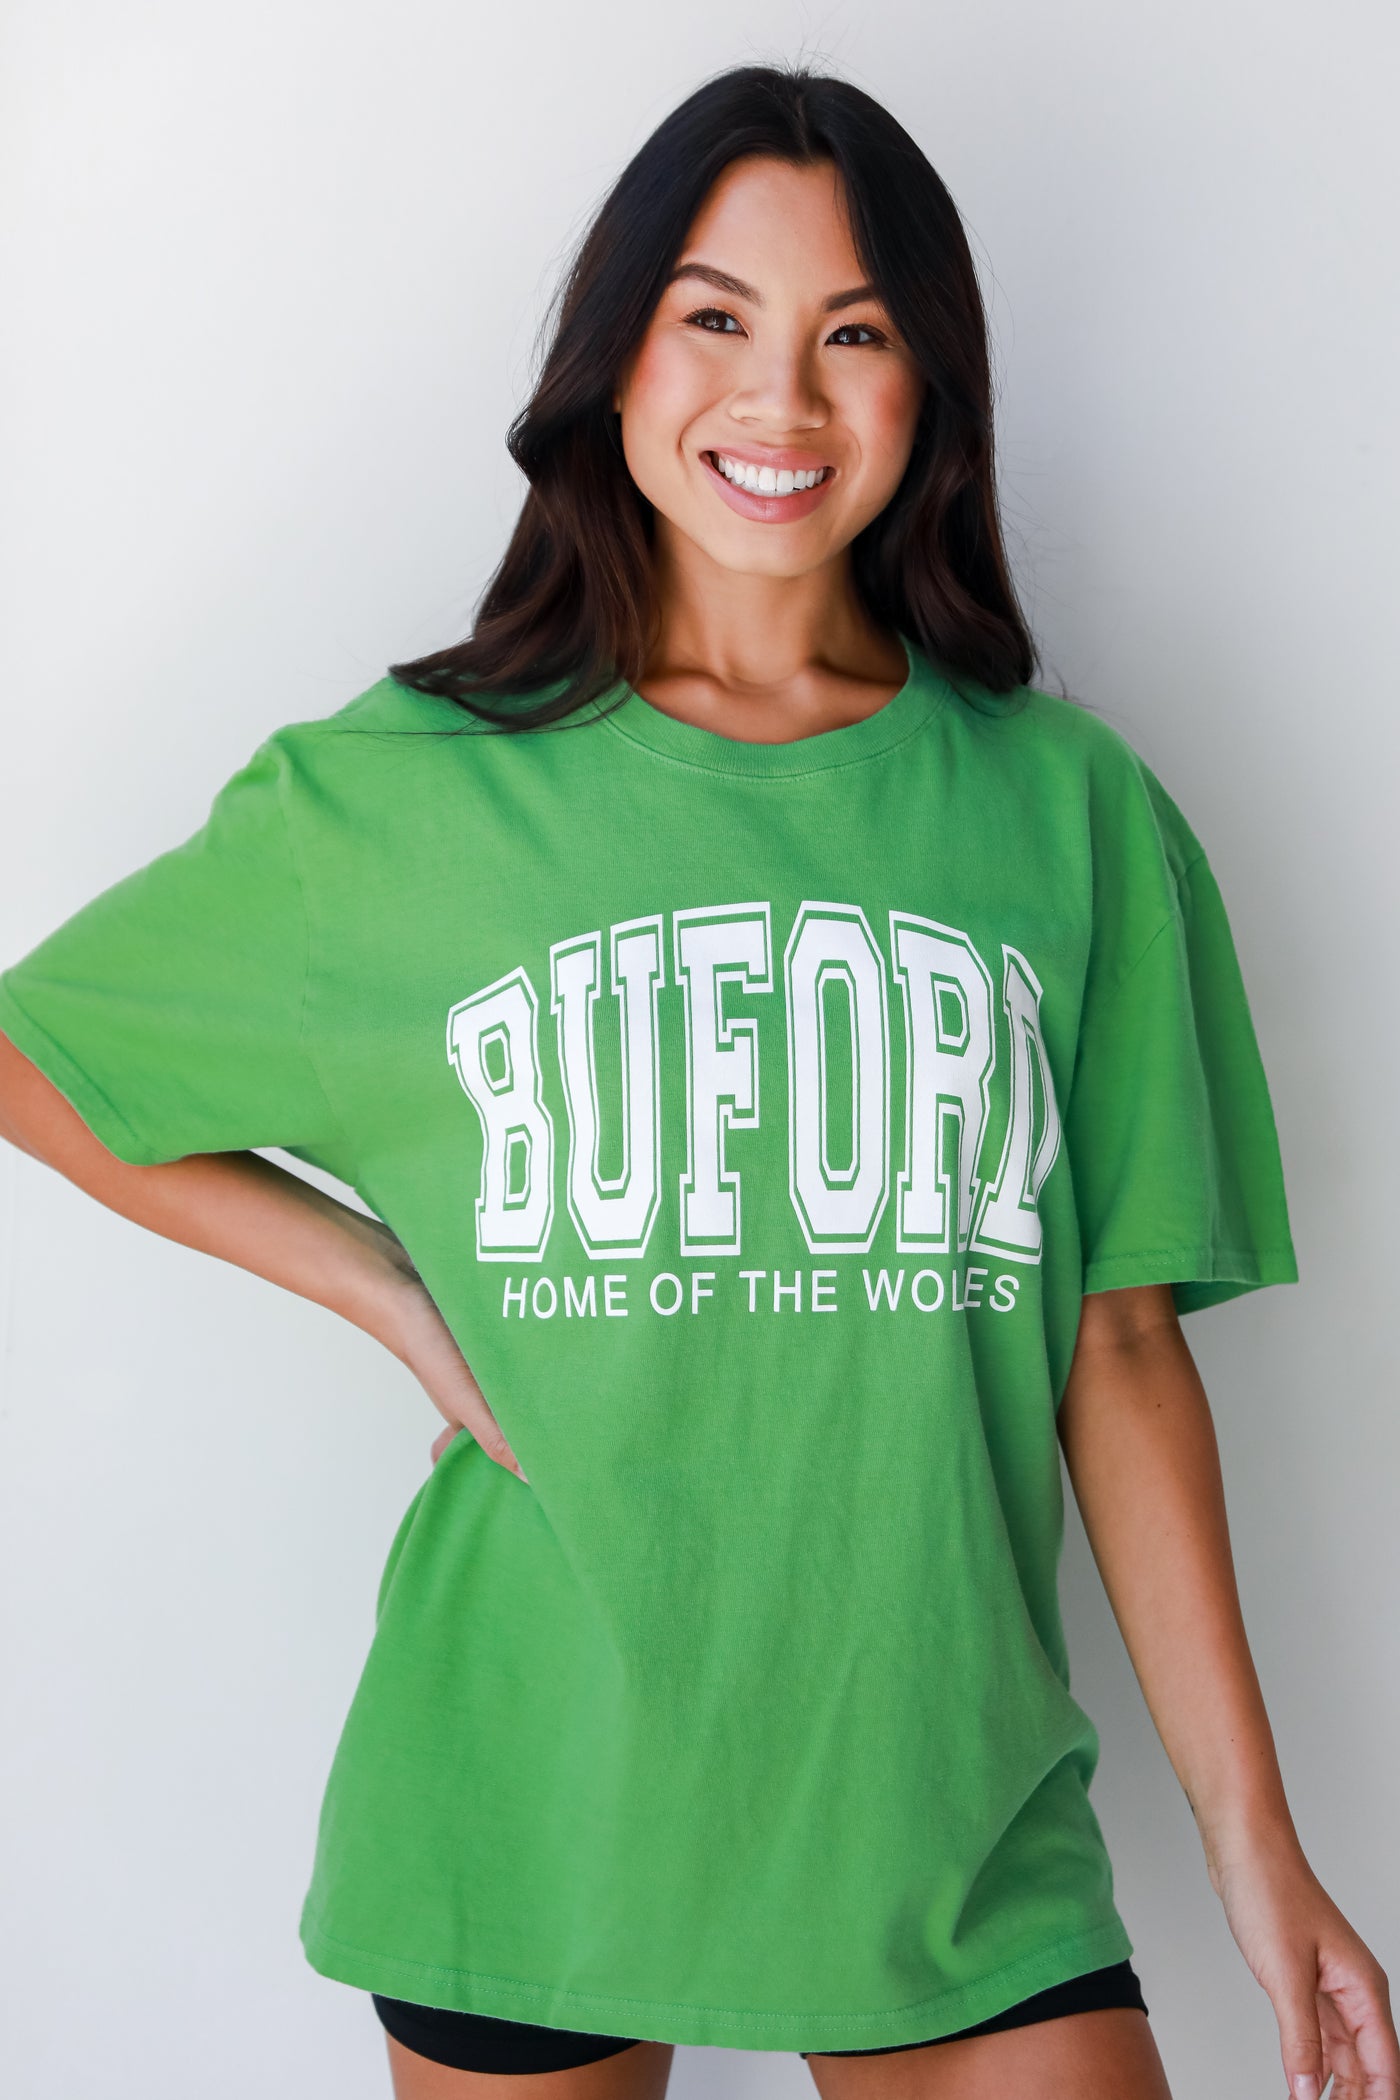 Green Buford Home Of The Wolves Block Letter Tee, Buford High School Tee, Football Tee